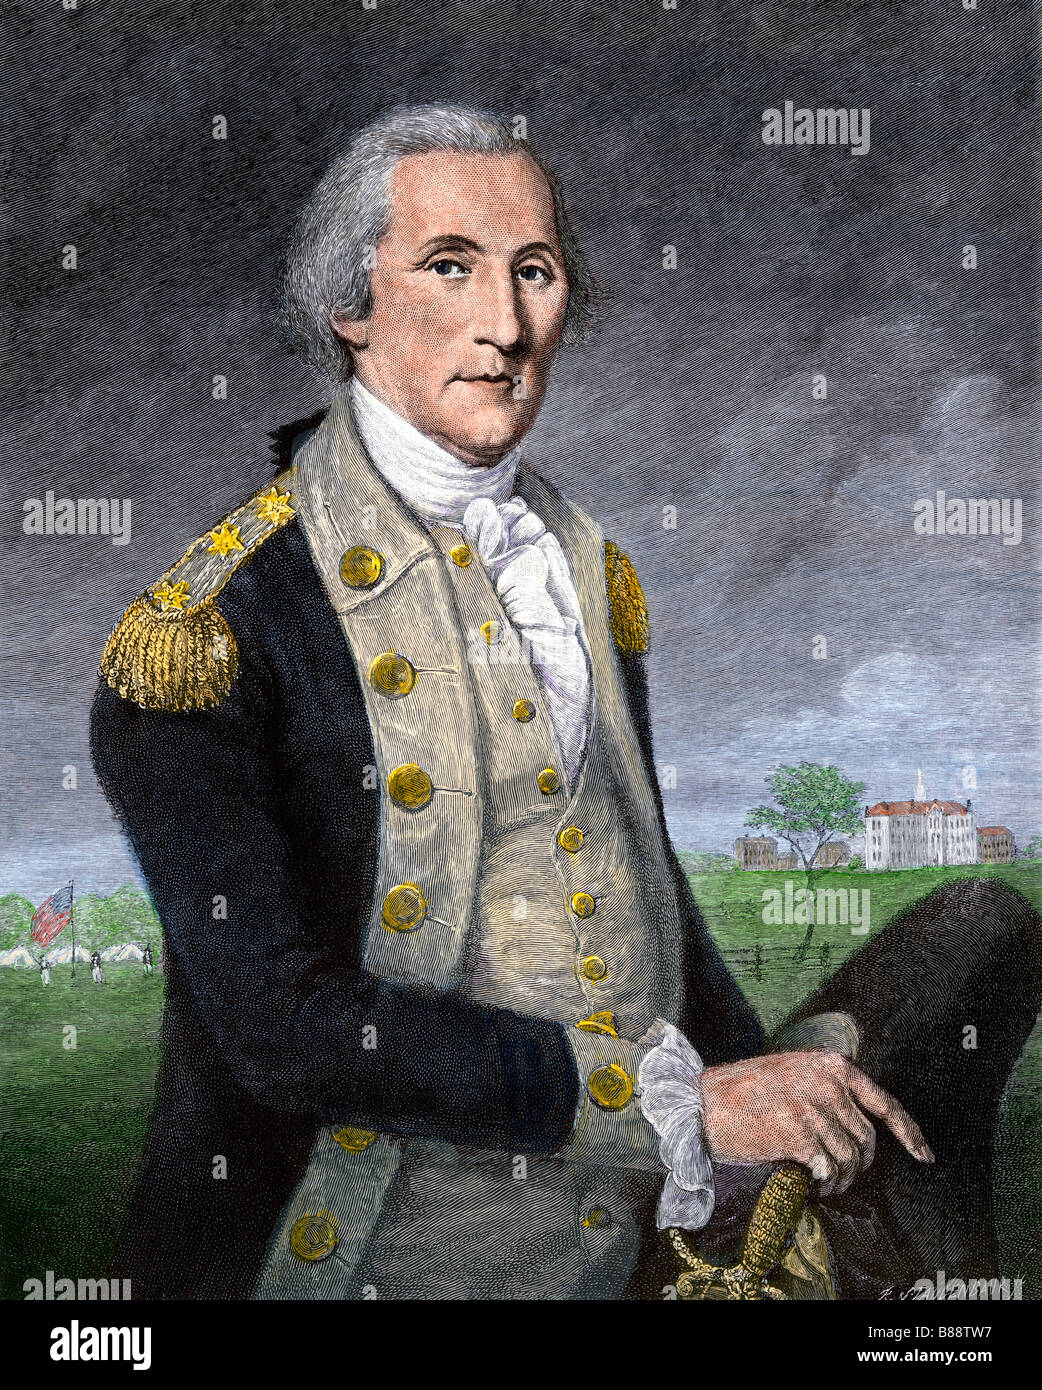 General George Washington at the close of the Revolutionary War. Hand-colored engraving Stock Photo